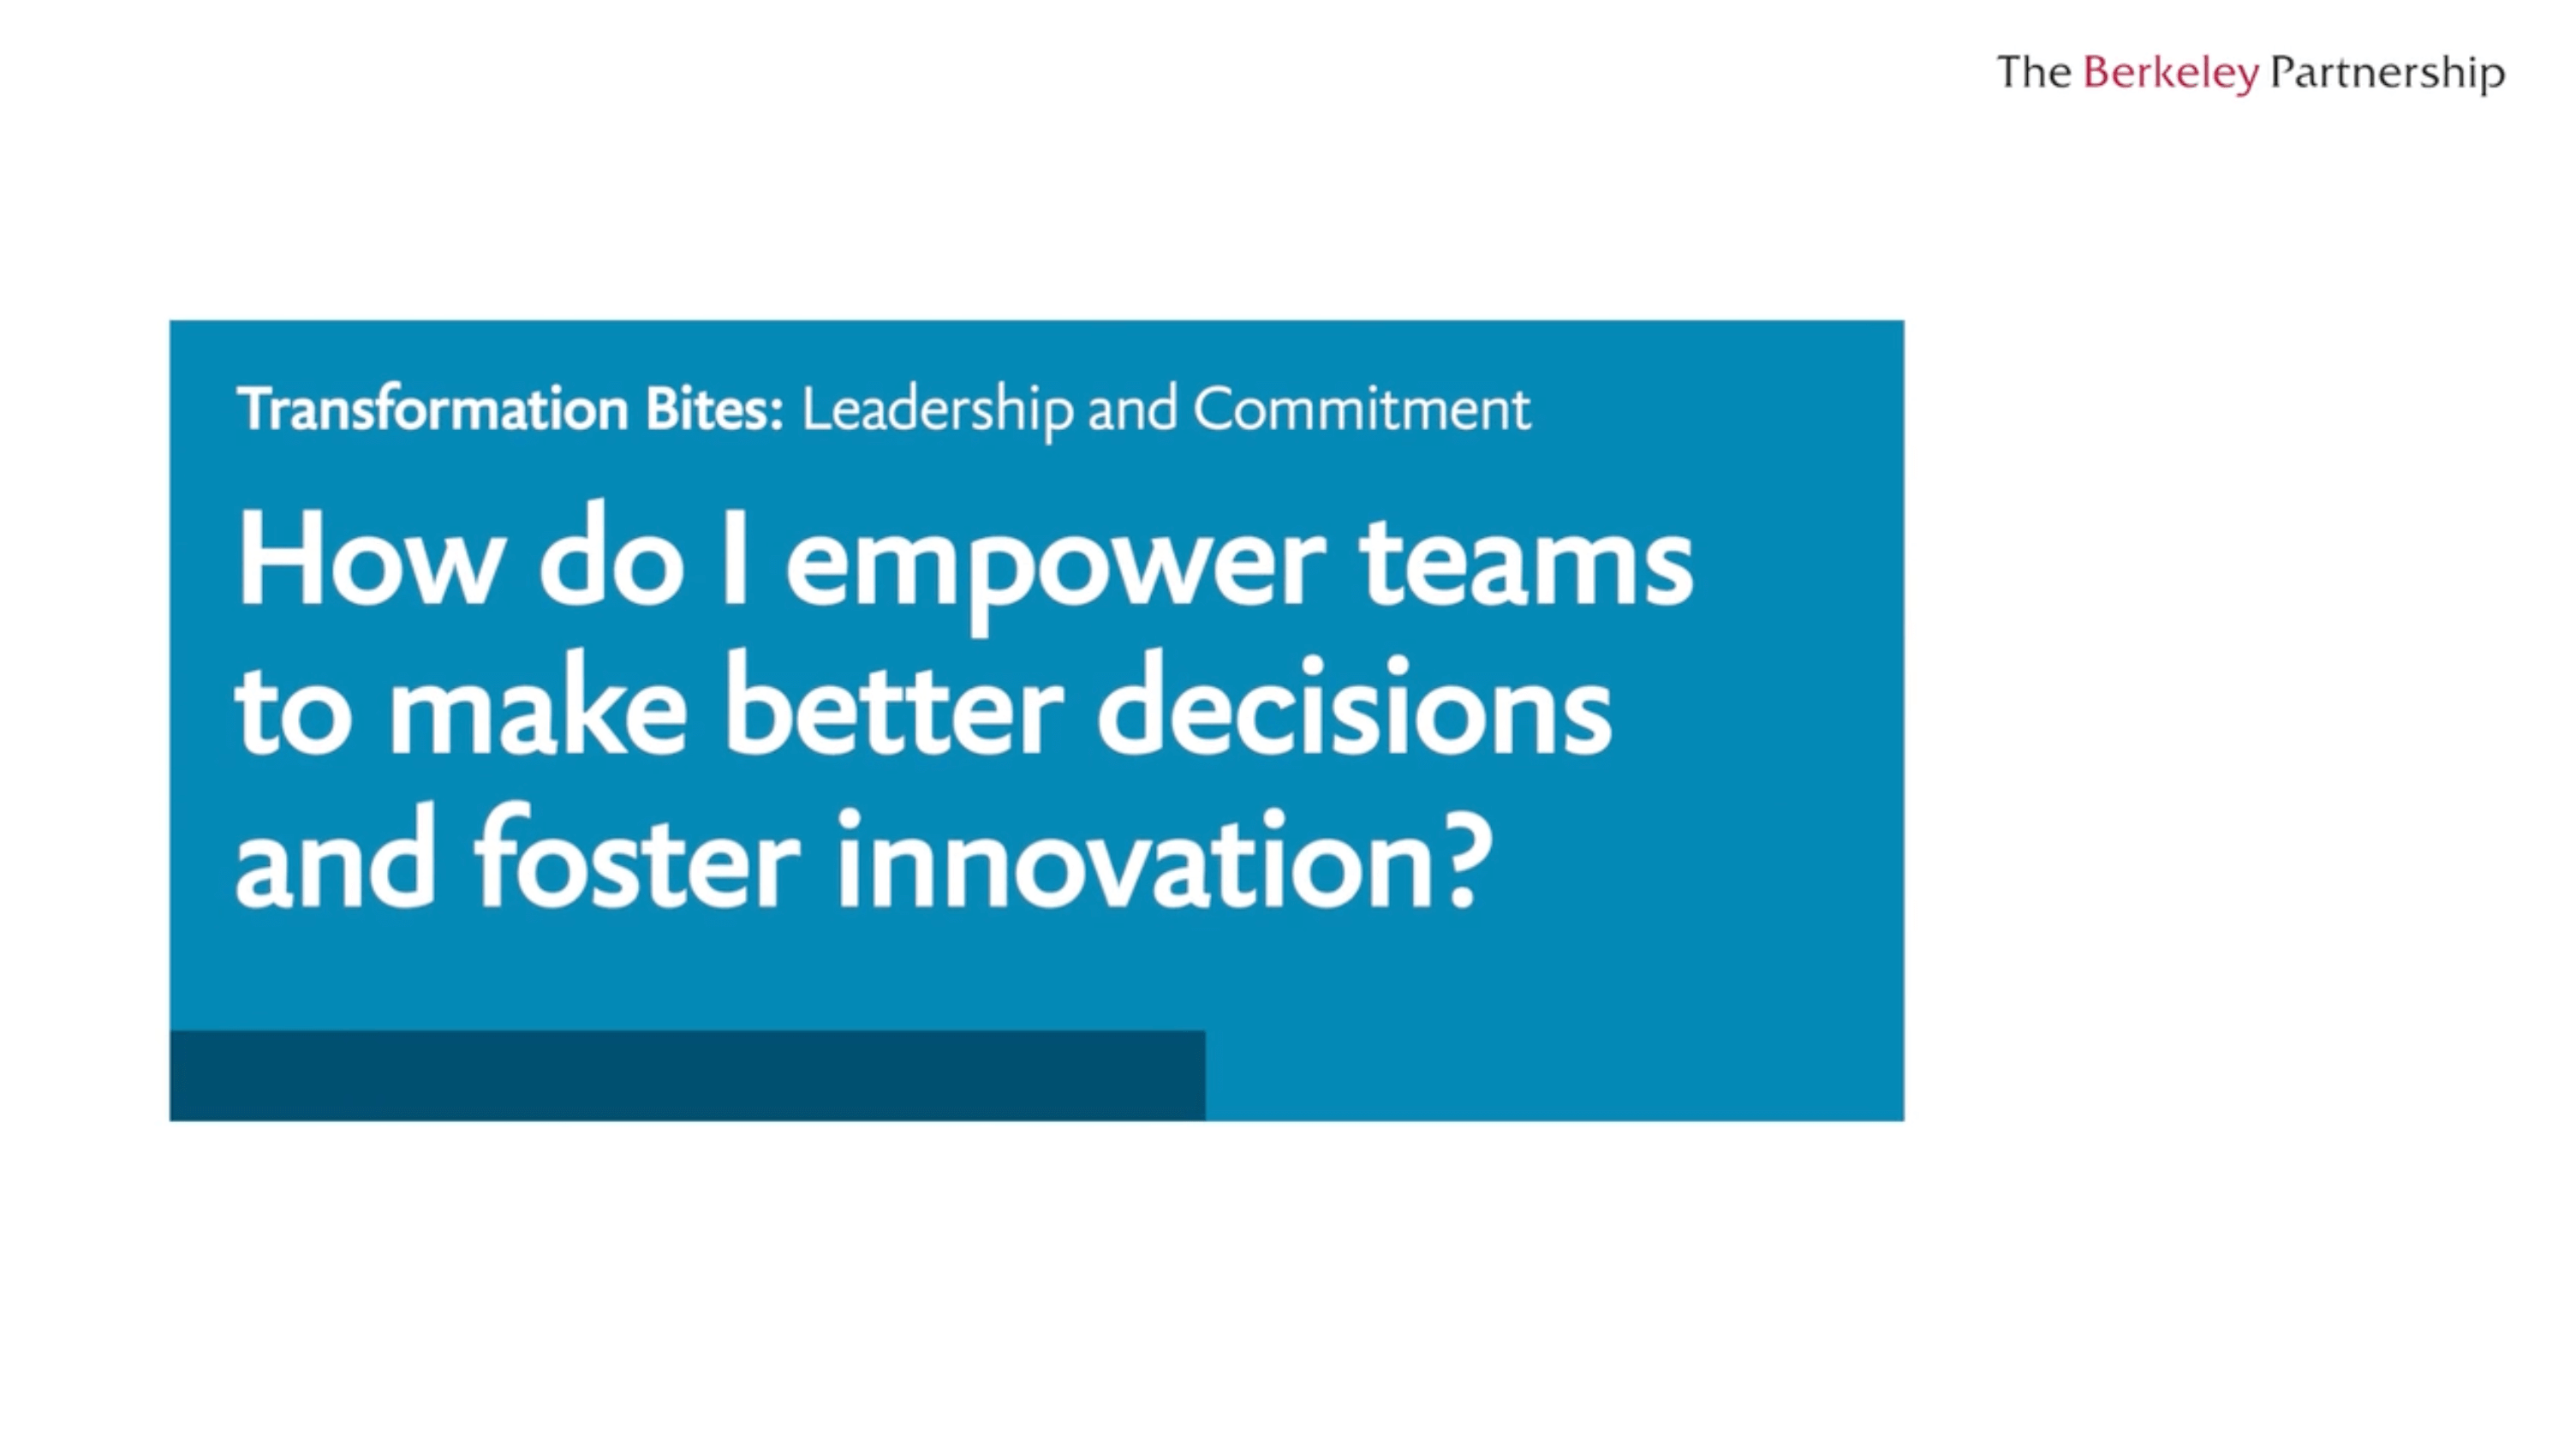 How do I empower teams to make better decisions and foster innovation?